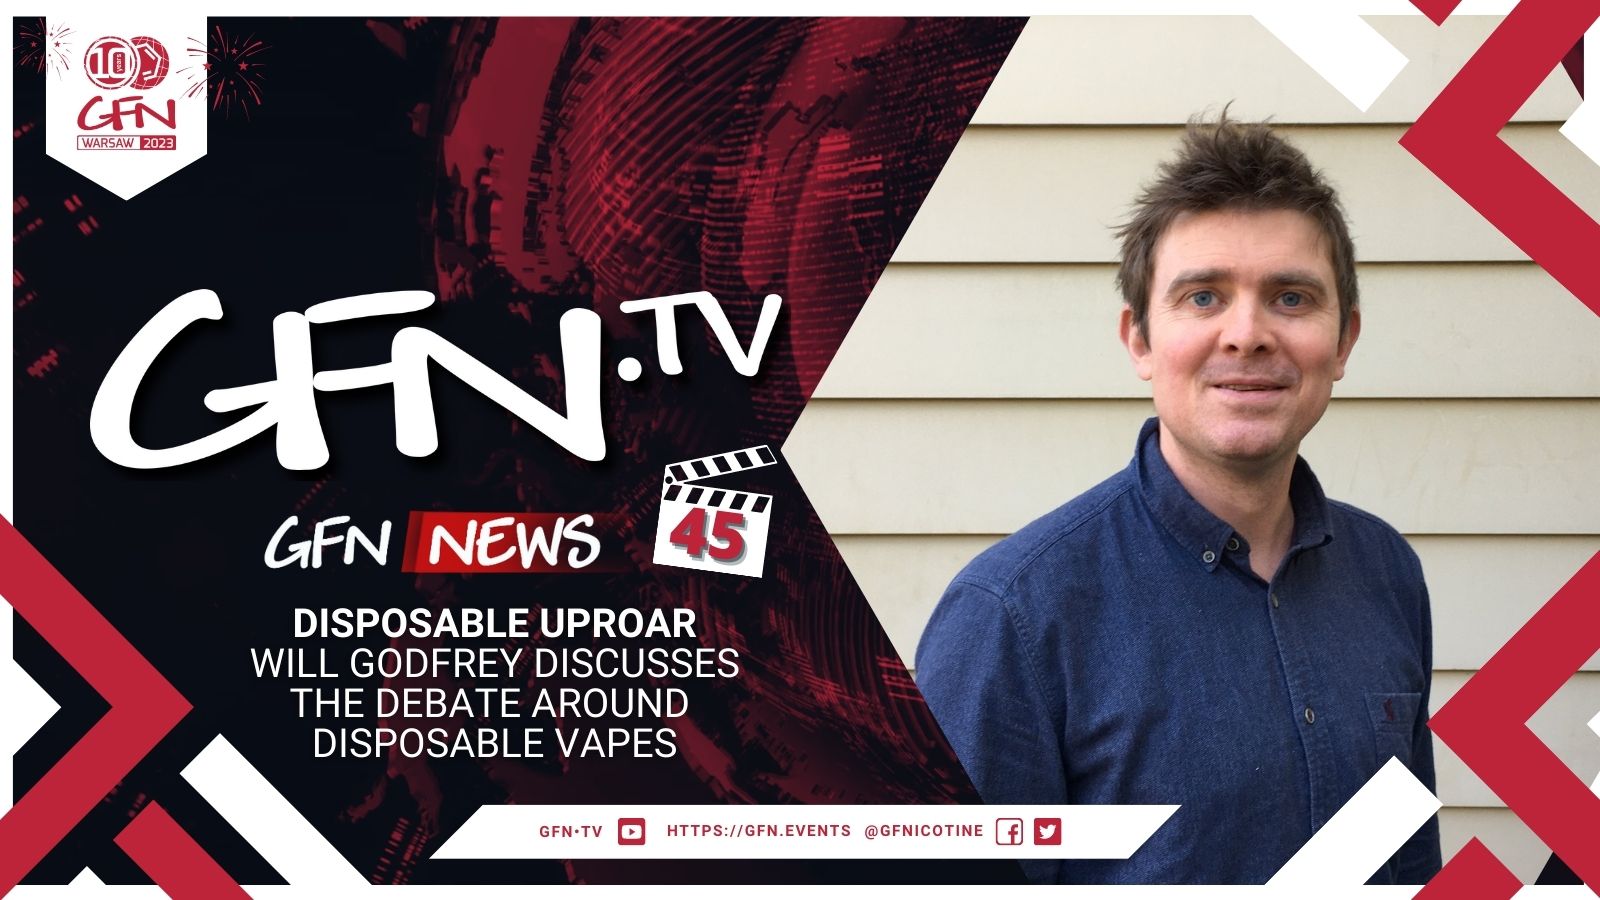 GFN News #45 | DISPOSABLE UPROAR | Will Godfrey discusses the debate around disposable vapes